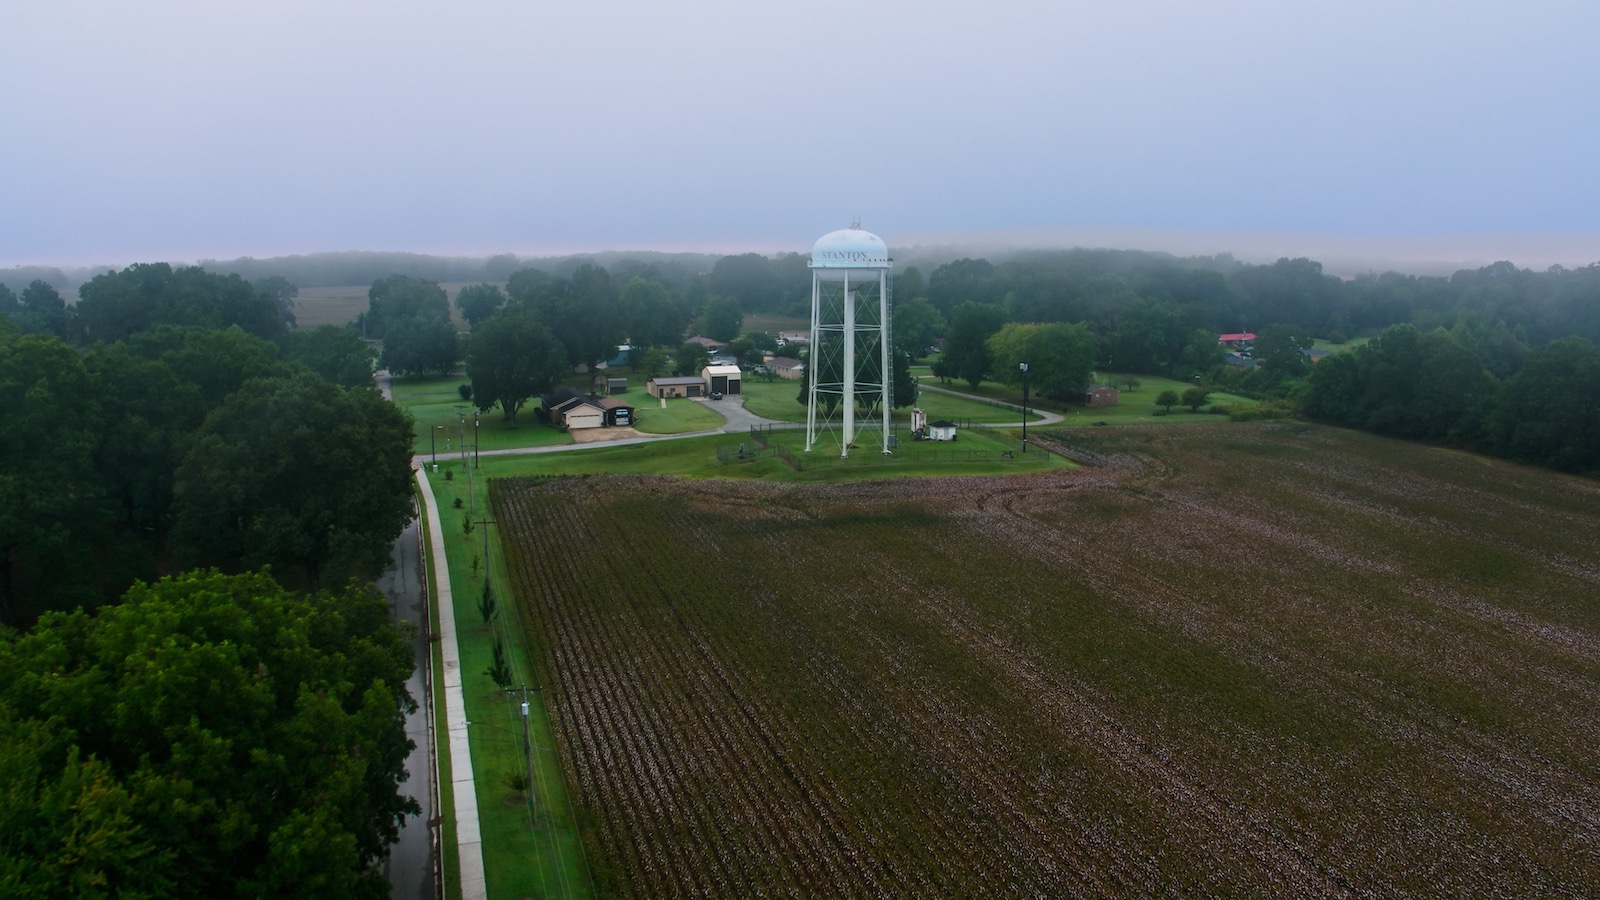 A plowed field and water tower are shouded in fog in an aerial photo of the town of Stanton, Tennessee.